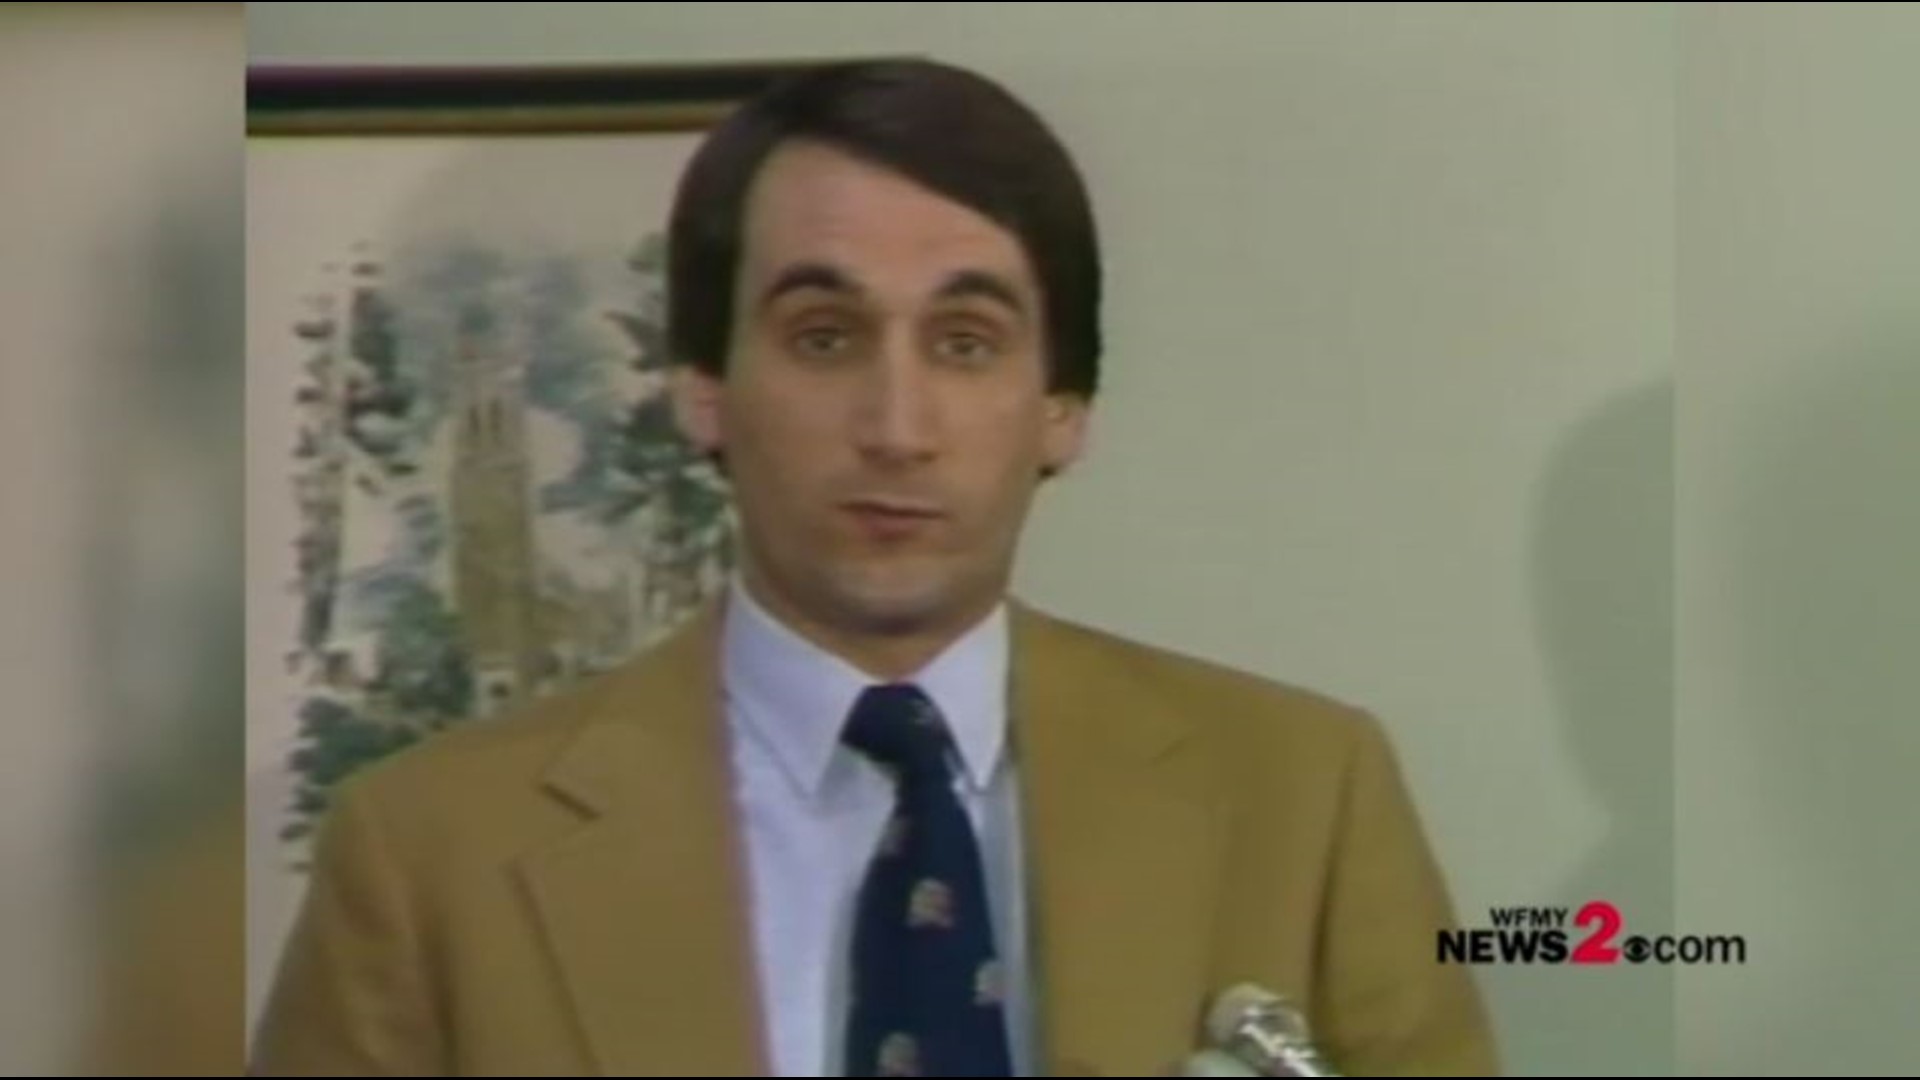 Duke Men's Basketball Head Coach Mike Krzyzewski was hired on March 18, 1980. Here's a throwback to his very first press conference.